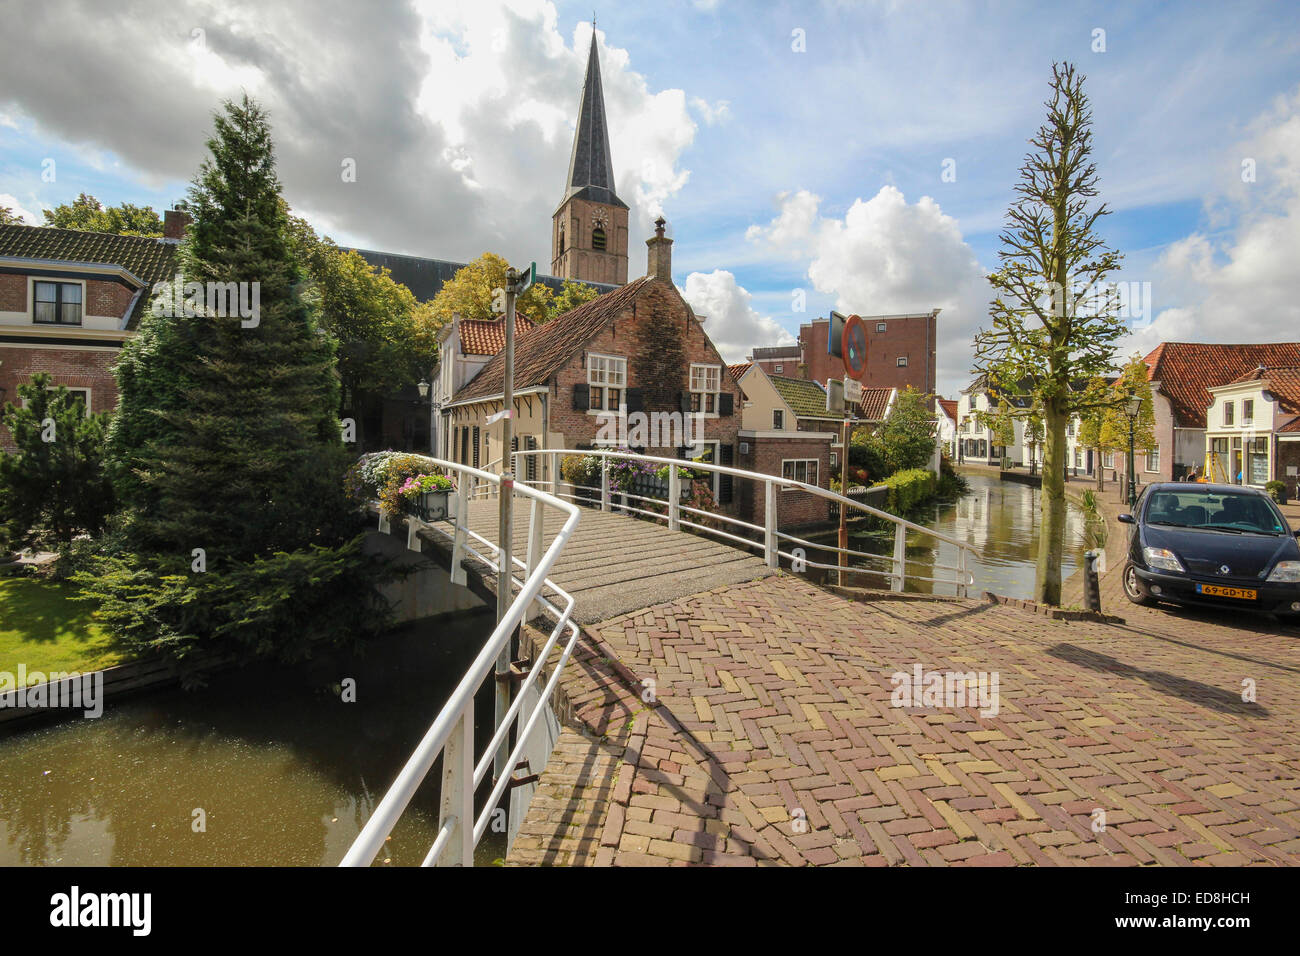 Towards the Oude Kerk (Old Church) in Maasland, South Holland, with the Kerkstraat bridge over the canal. This leads to Kerkplein and the church. Stock Photo